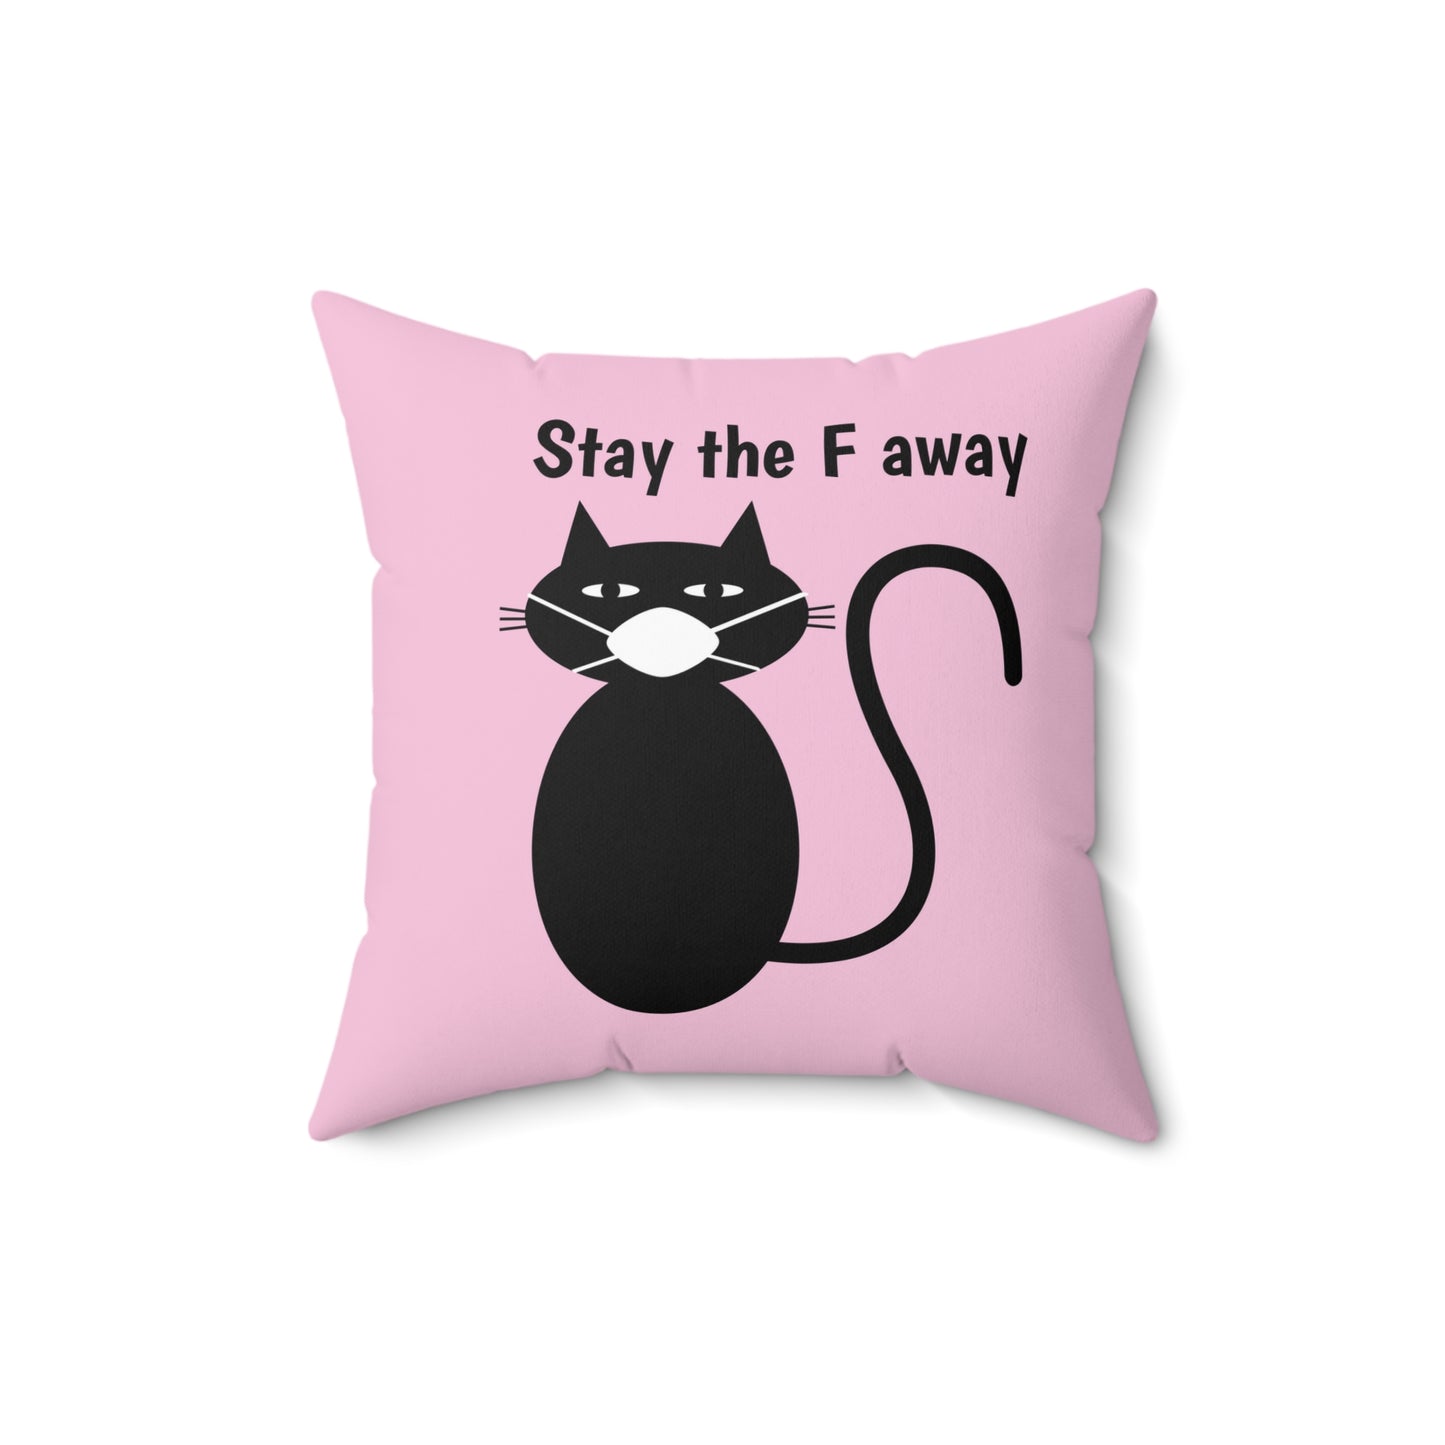 Black cat wearing mask says Stay the F away Pillow